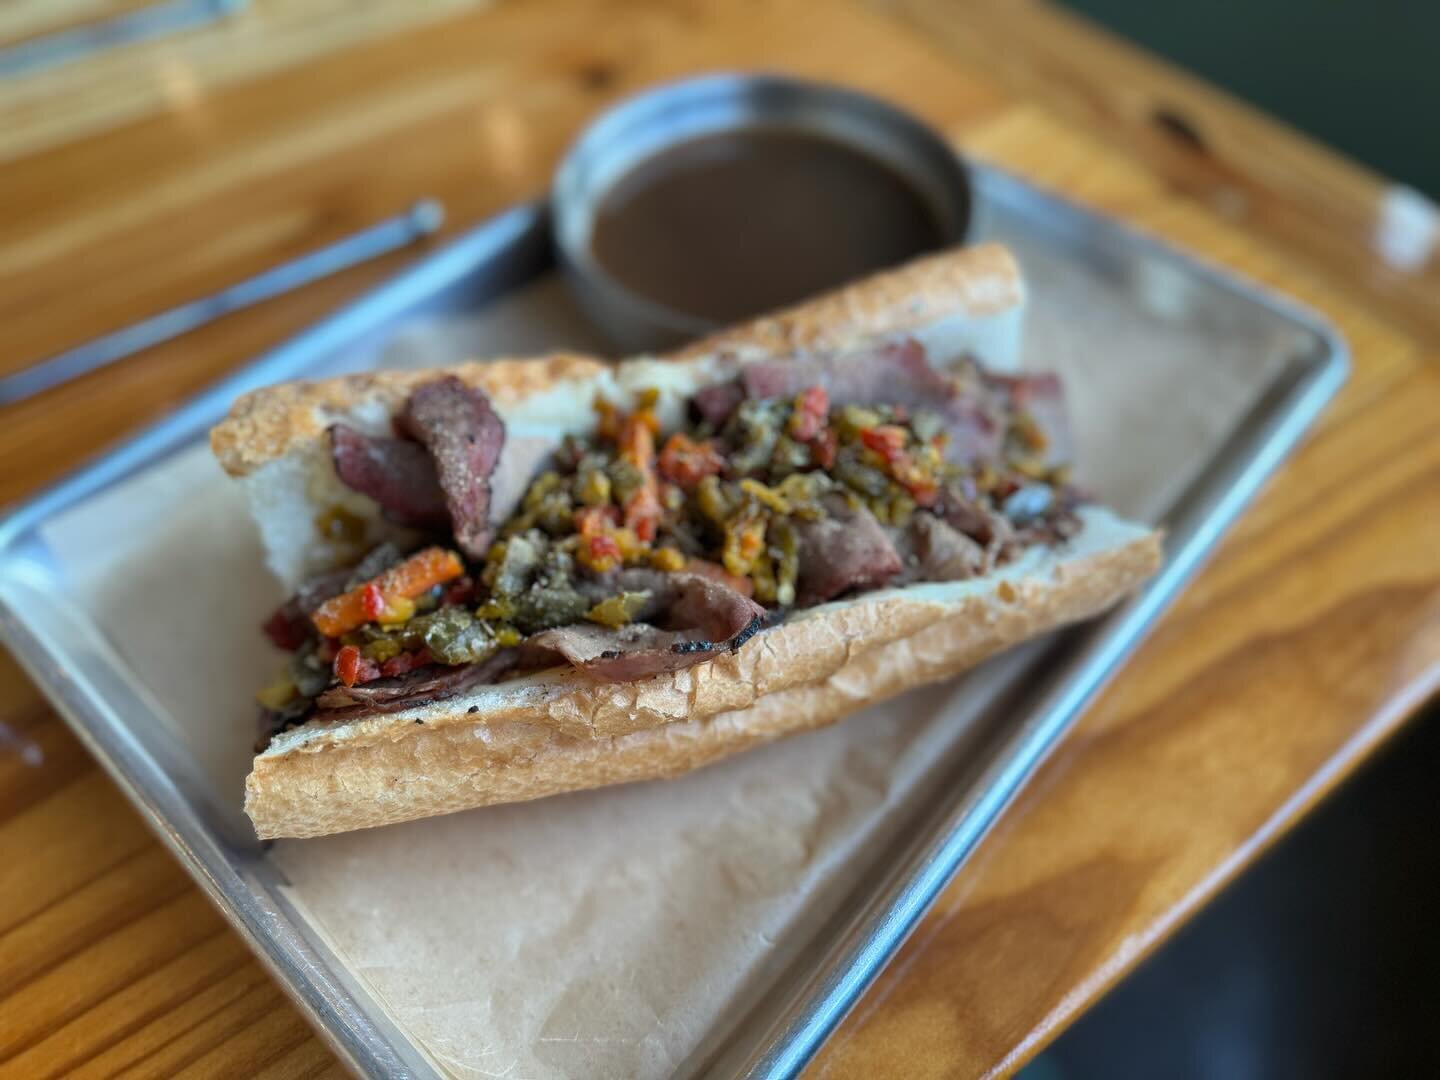 New SMOKED ITALIAN BEEF! Smoked then simmered eye of round, provolone, giardiniera. Comes with au jus &amp; makes you a better person. 

#italianbeef #sandwich #oakcliff #dallas #cenzos